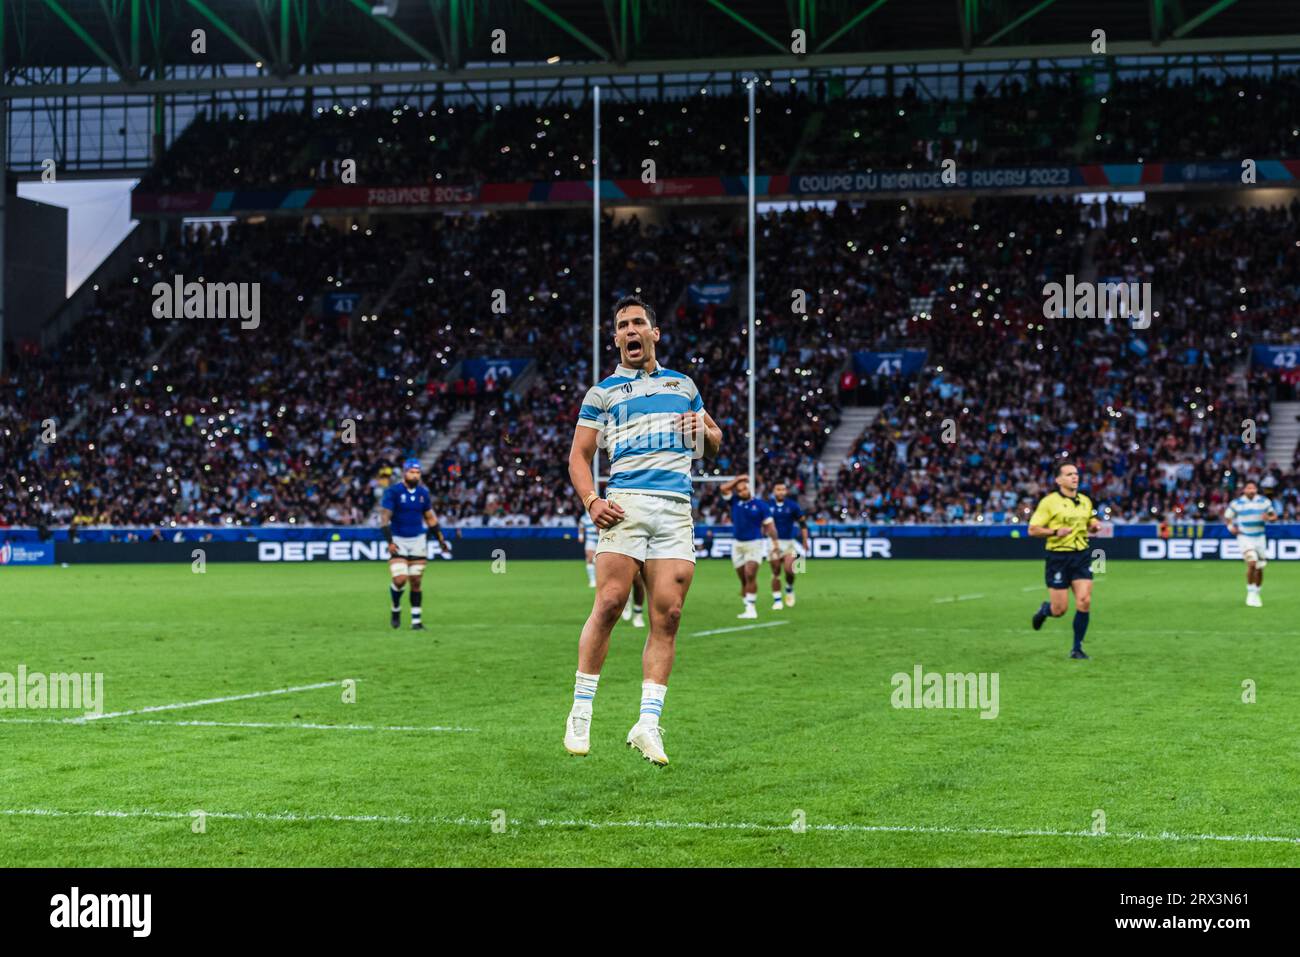 Saint-Étienne, France. 22nd September, 2023. Matías Moroni of Argentina celebrates during the Rugby World Cup Pool D match between Argentina and Samoa at Stade Geoffroy-Guichard. Credit: Mateo Occhi (Sporteo) / Alamy Live News Stock Photo